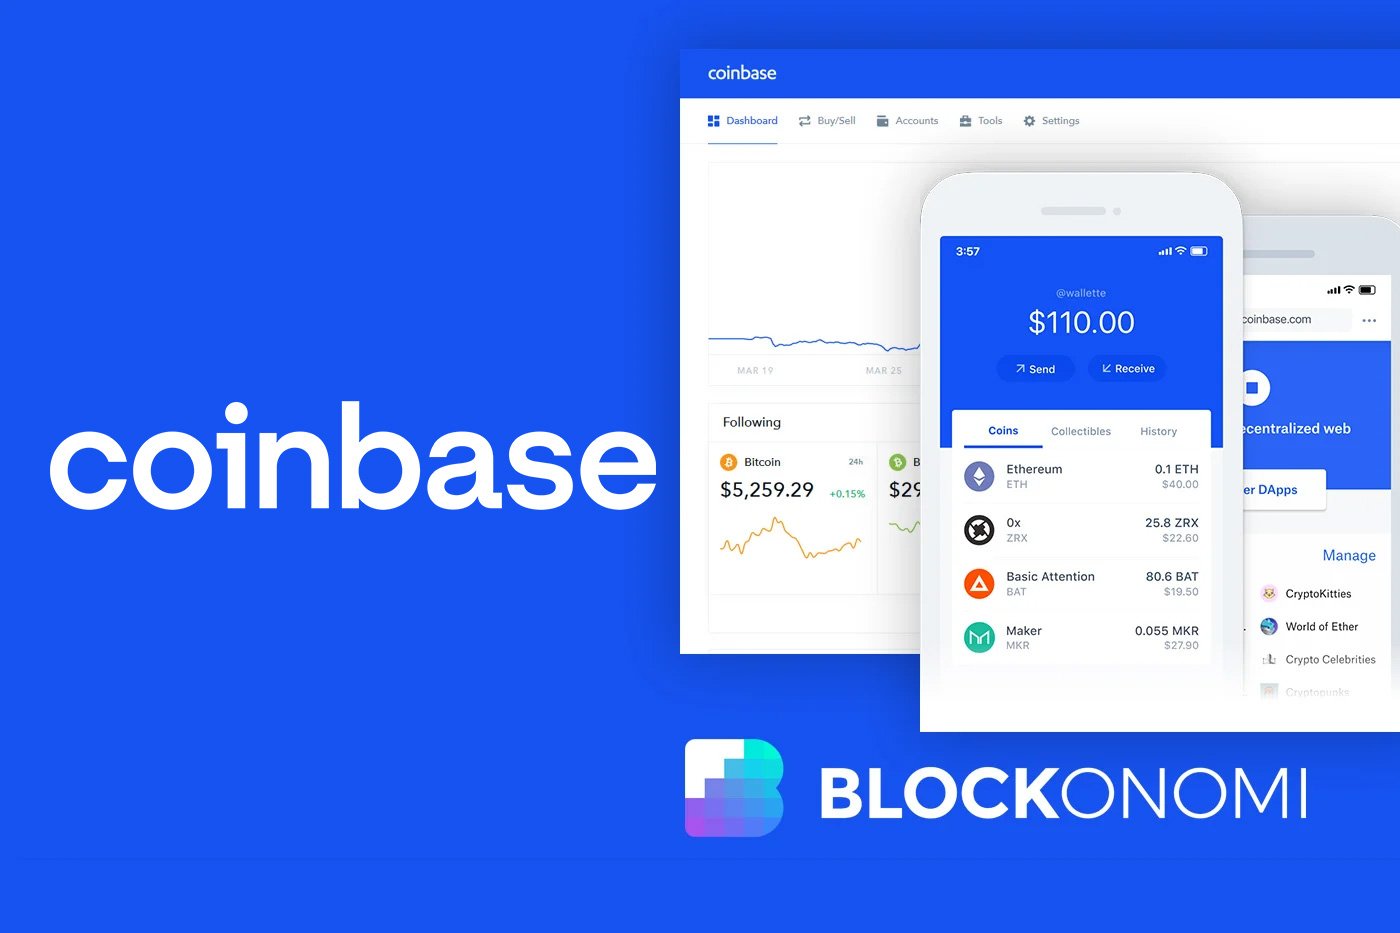 3D Secure with Coinbase - bunq Together